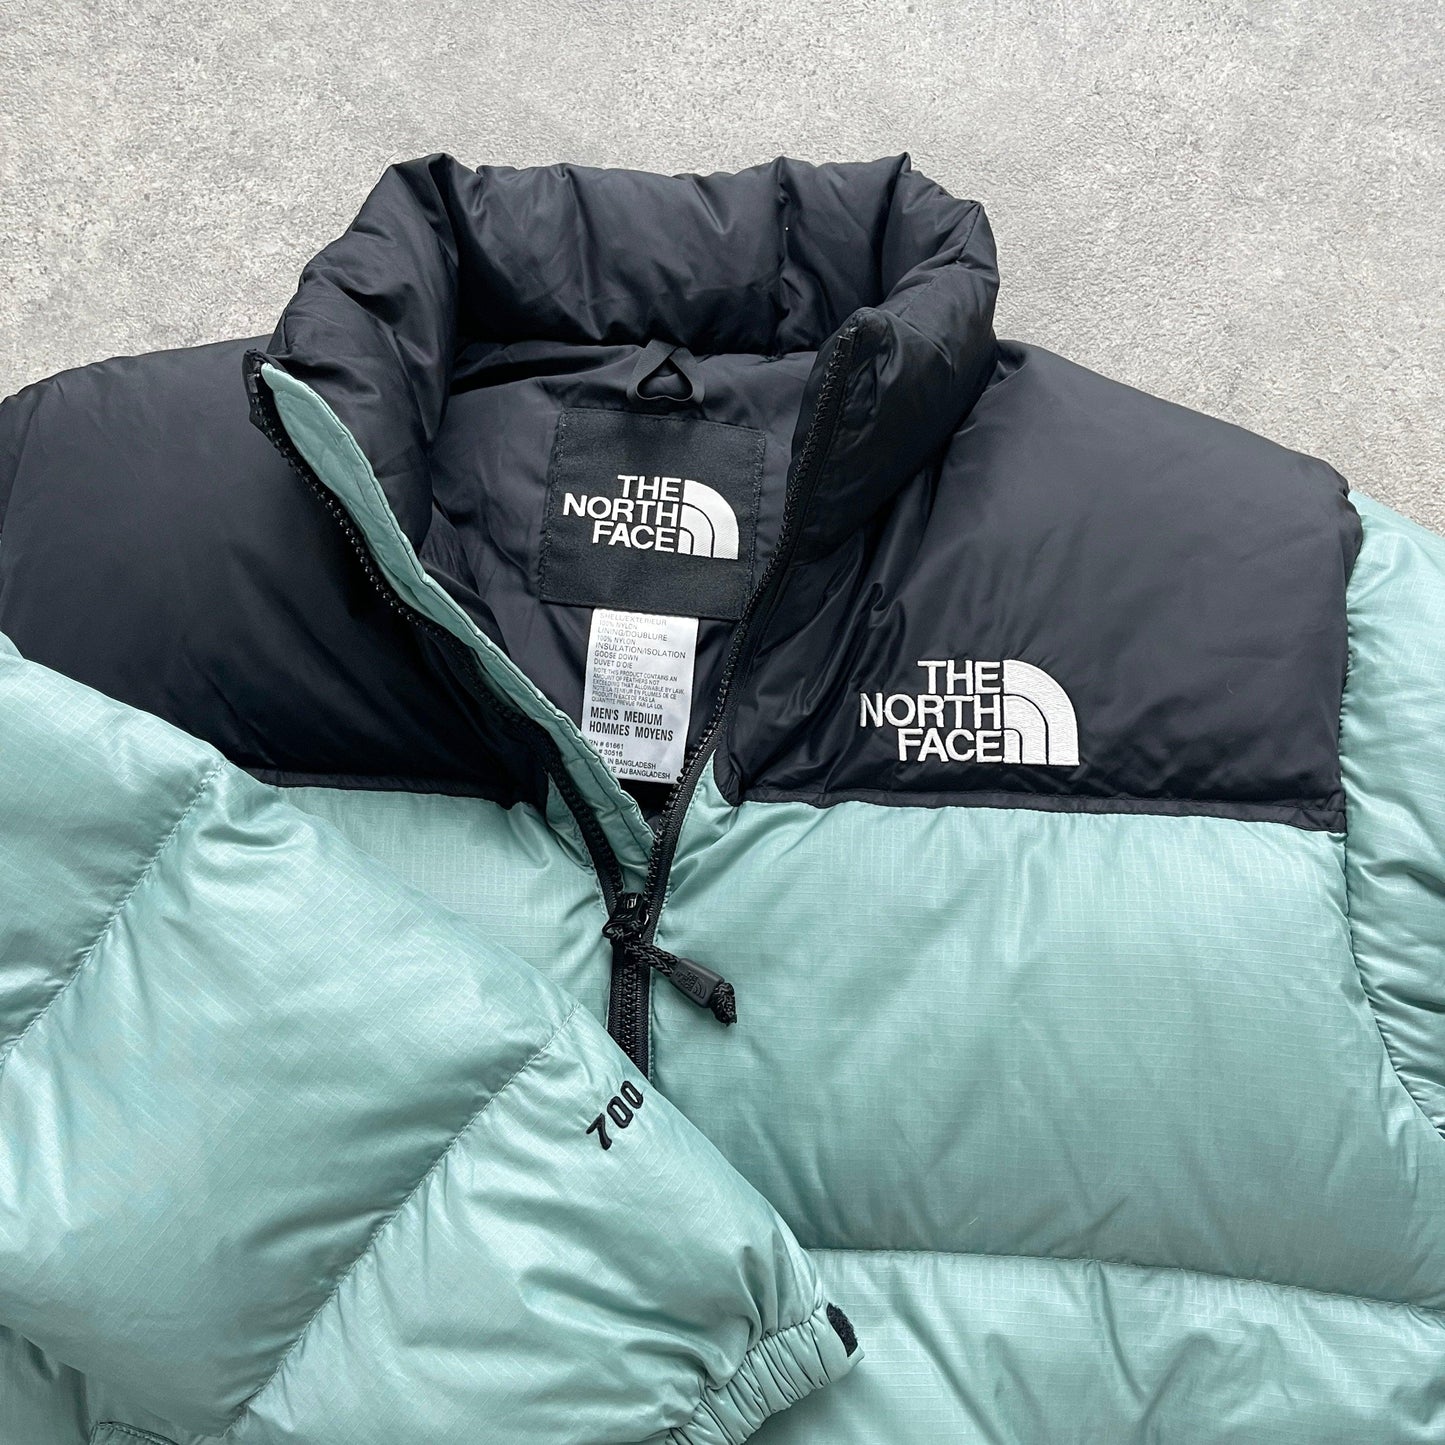 The North Face RARE Nuptse 700 down fill puffer jacket (M) - Known Source